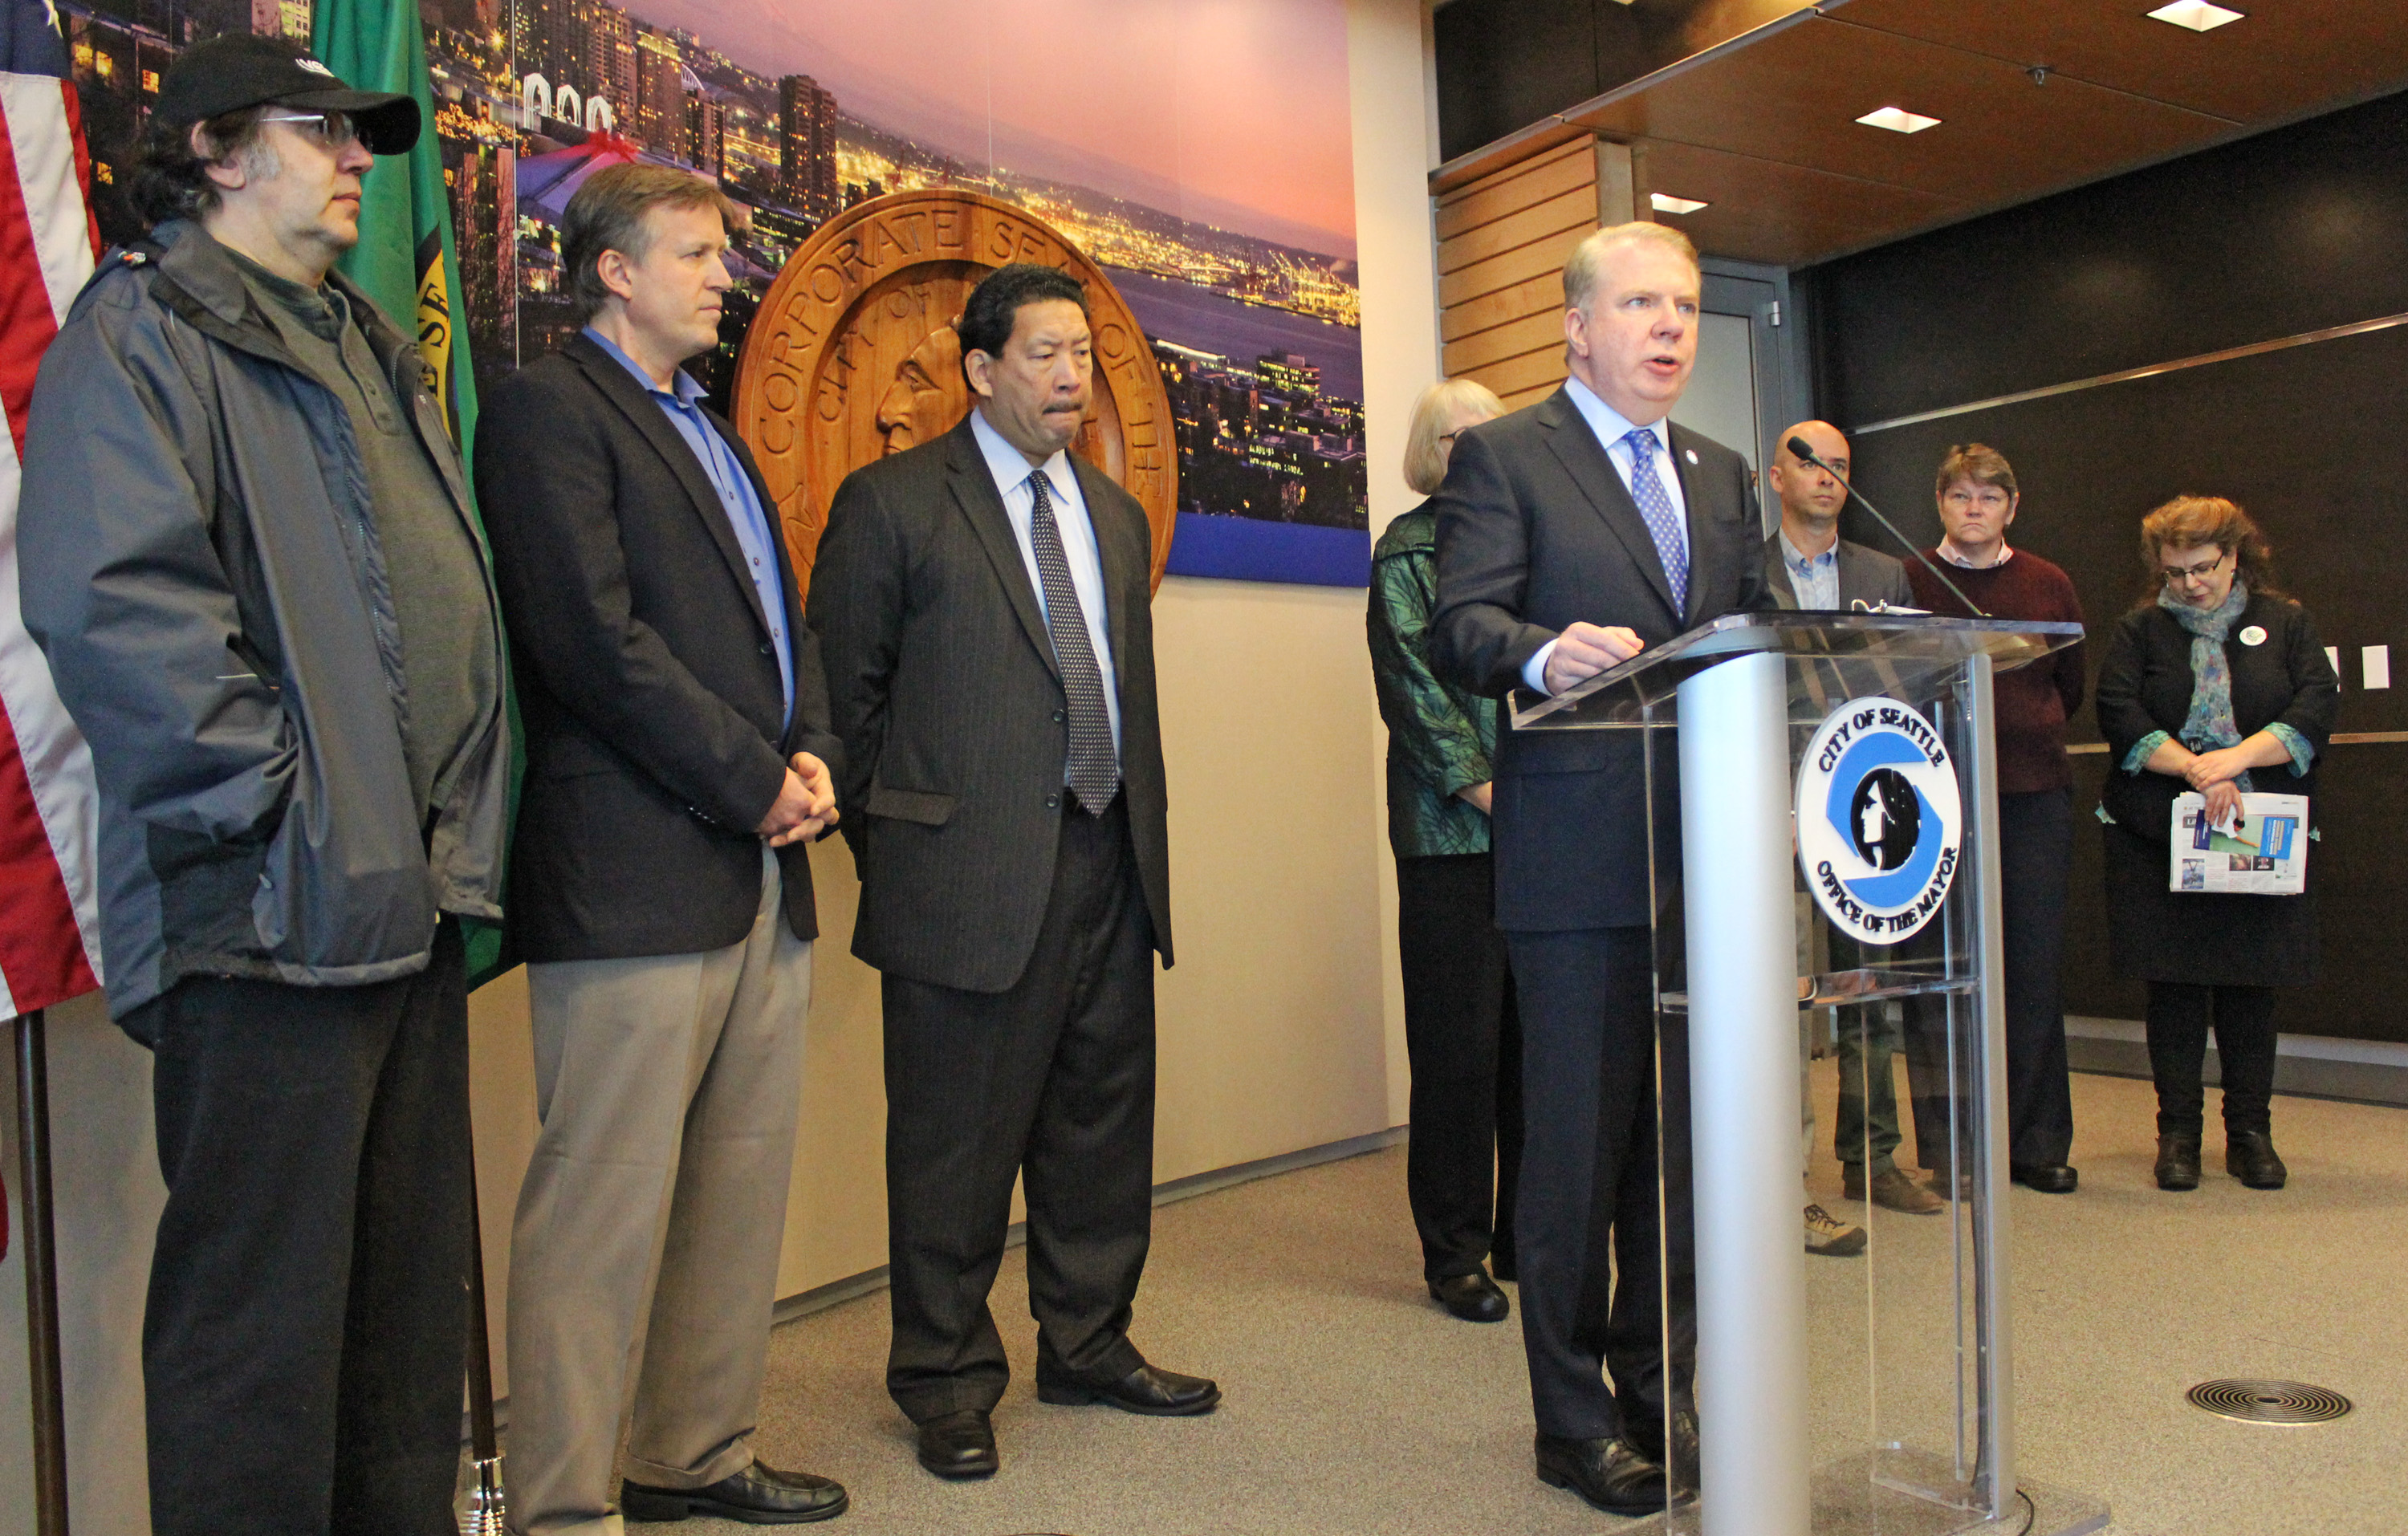 Murray announced plans Wednesday to expand emergency homeless shelter beds and allow up to three permitted encampments in Seattle. Courtesy of the Mayor's Office